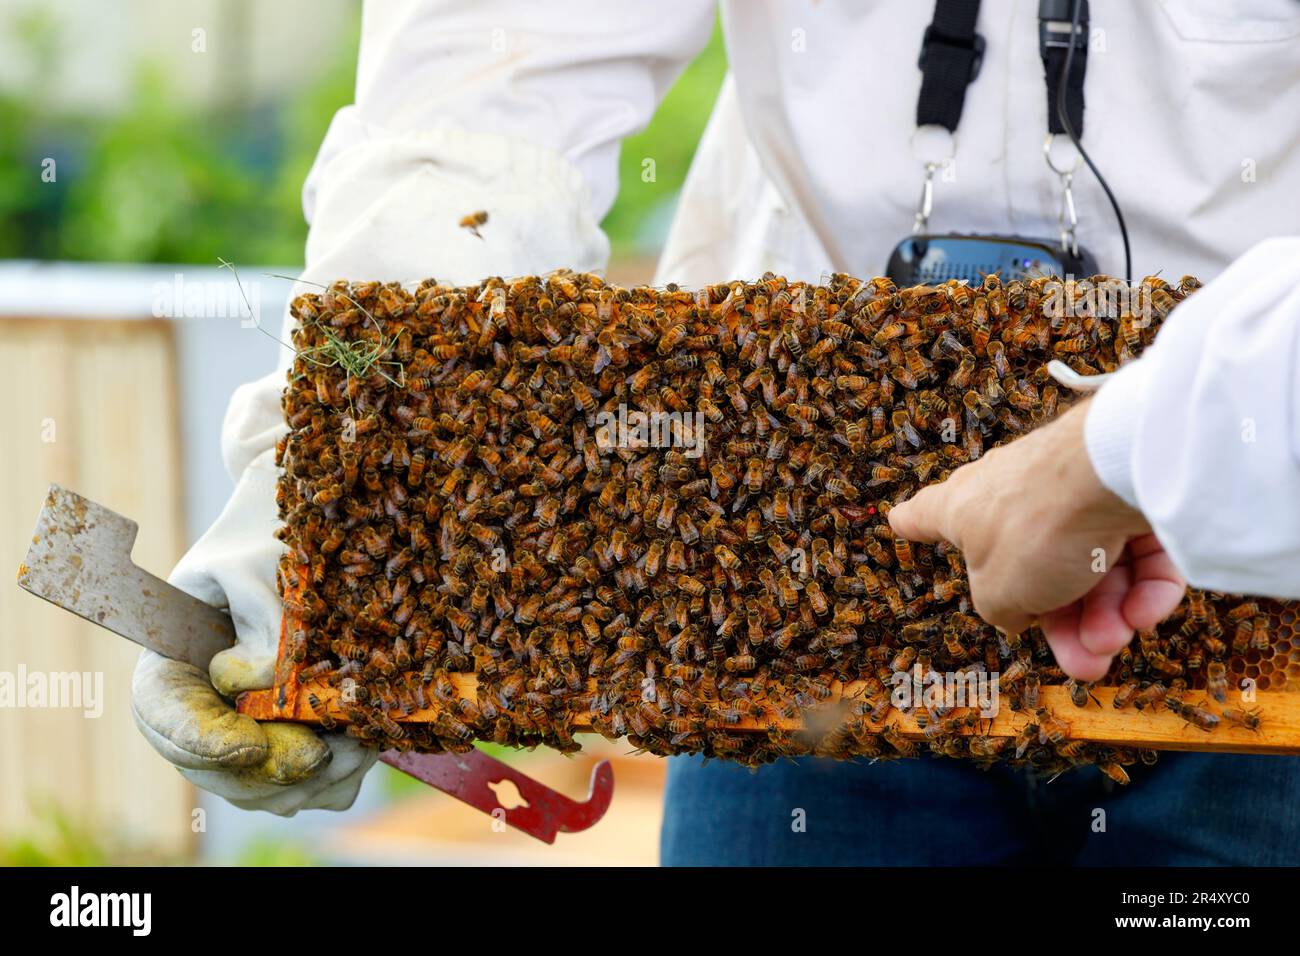 A beekeeper with a J hook hive tool holds a brood comb full of honeybees while a finger points to the red dot marked queen bee. Stock Photo